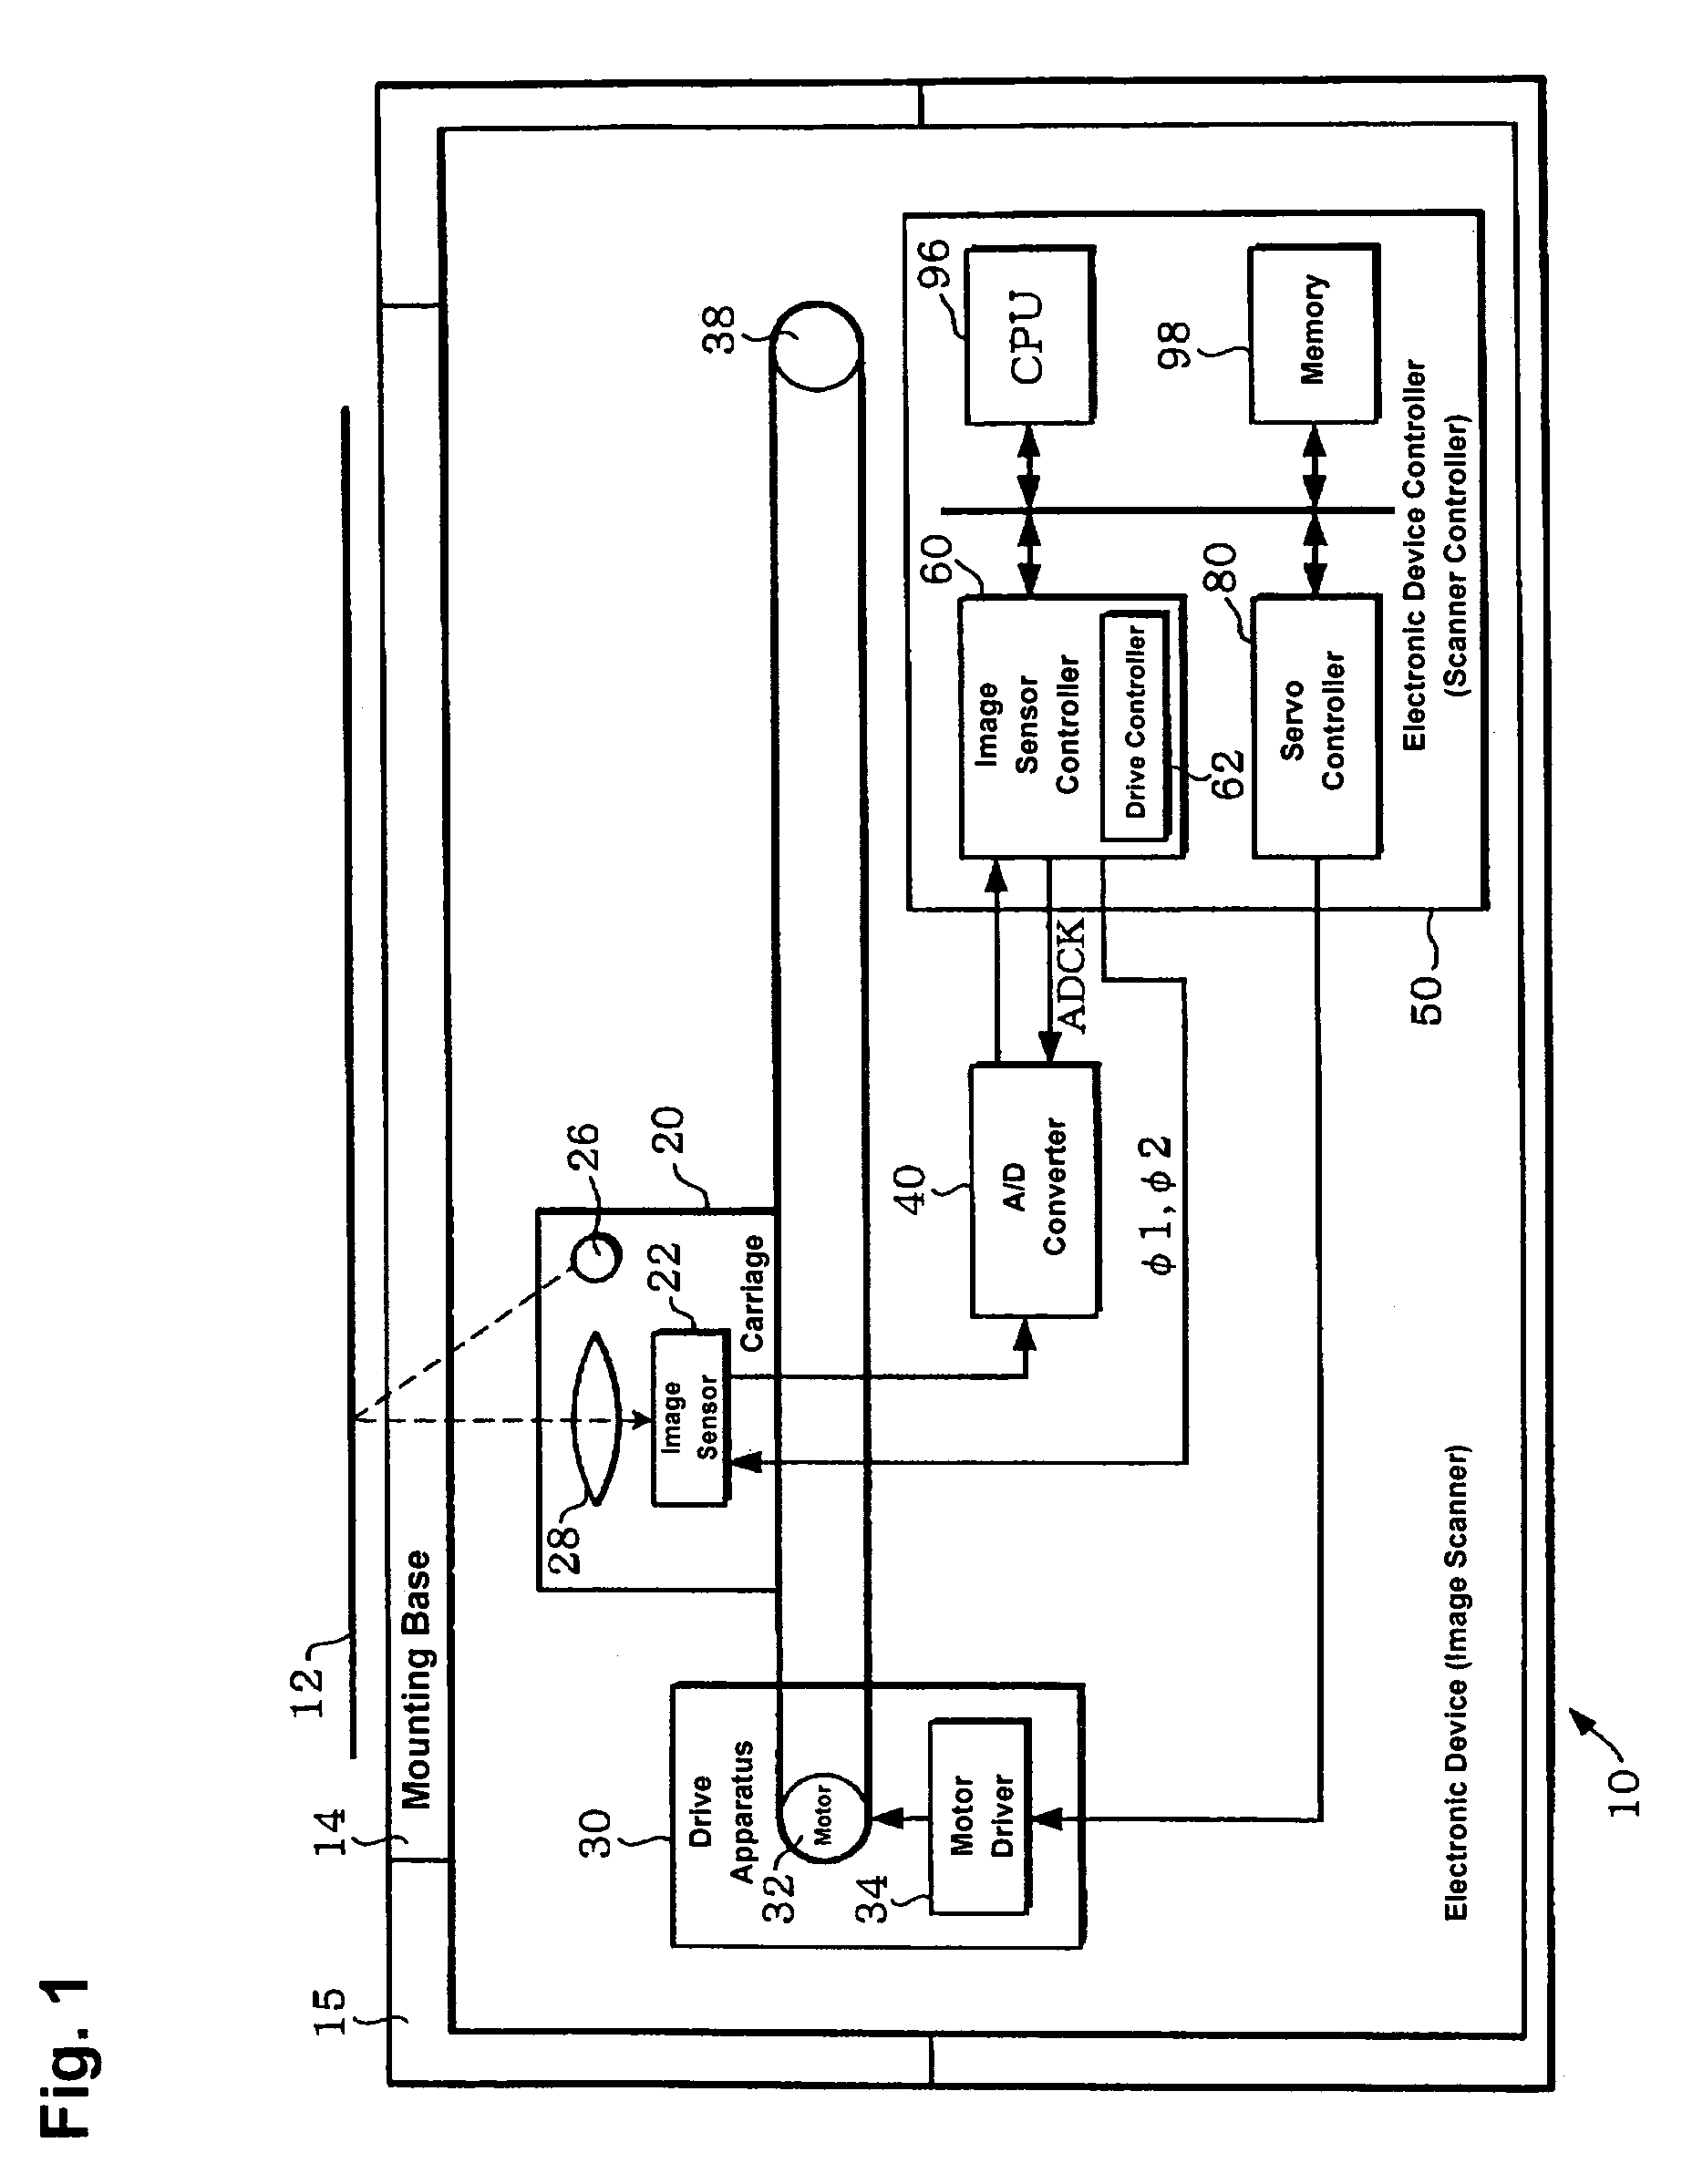 Image sensor controller, electronic device, and method for controlling image sensor